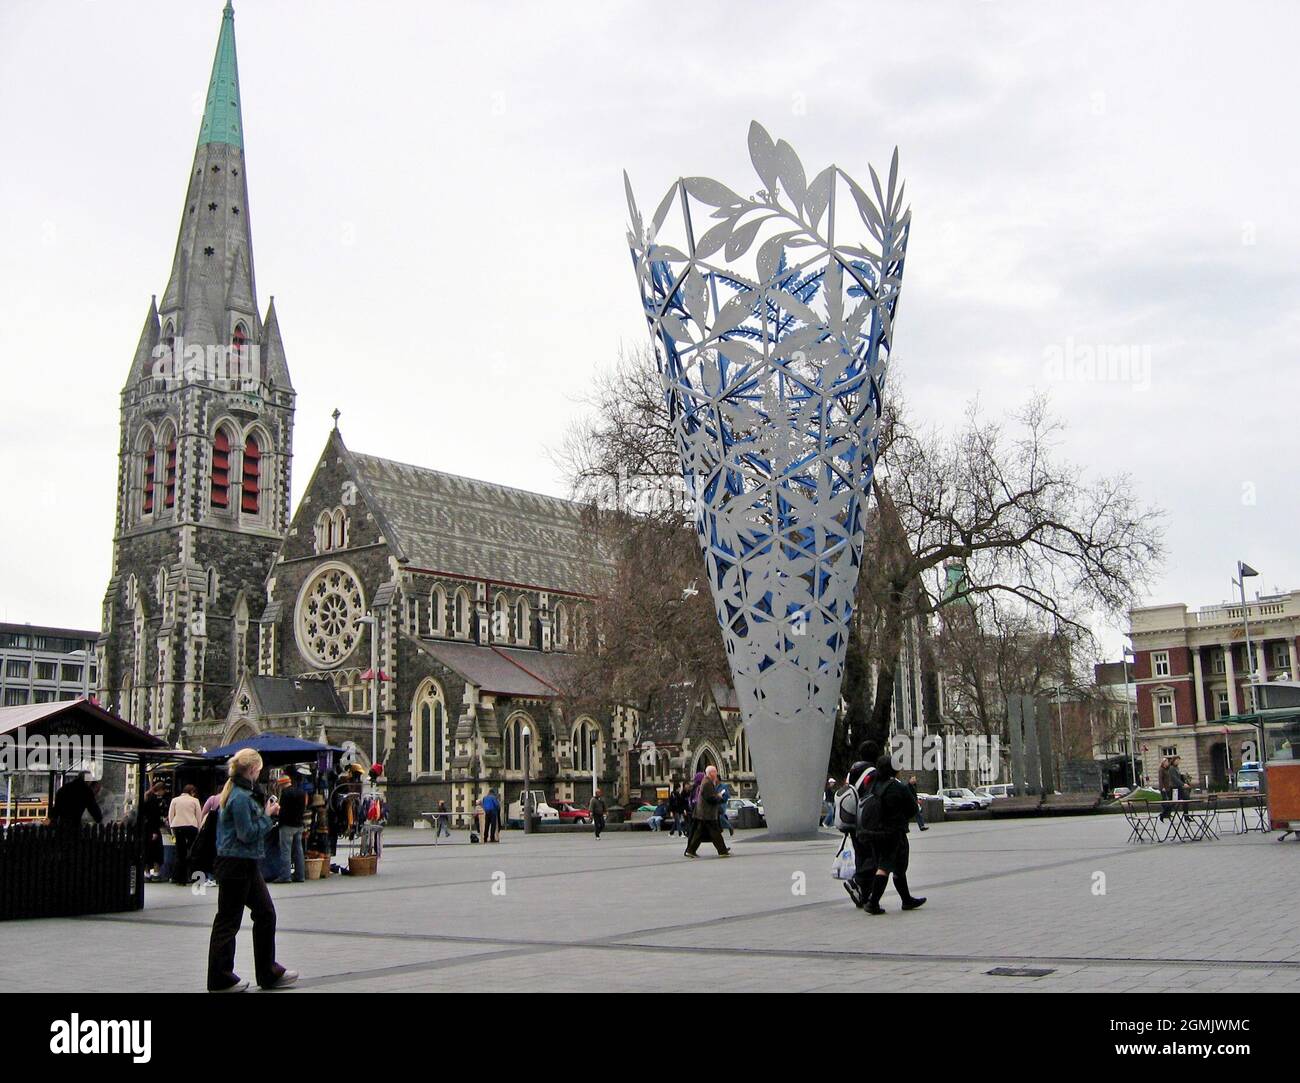 Cathedral Square, considered the center of Christchurch, New Zealand contains numerous landmarks including the historic ChristChruch Anglican Church and the modern public art nearby, The Chalice.  On February 22, 2011, an earthquake with the magnitude of 6.3 caused catastrophic damage to the landmark cathedral, the city, and the Canterbury region as a whole.  There were numerous aftershocks including the magnitude 6.0 aftershock on June 13, 2011.  Casualty estimates made this the fifth deadliest even in New Zealand history. The photo of Cathedral Square was taken on September 14, 2004. Stock Photo